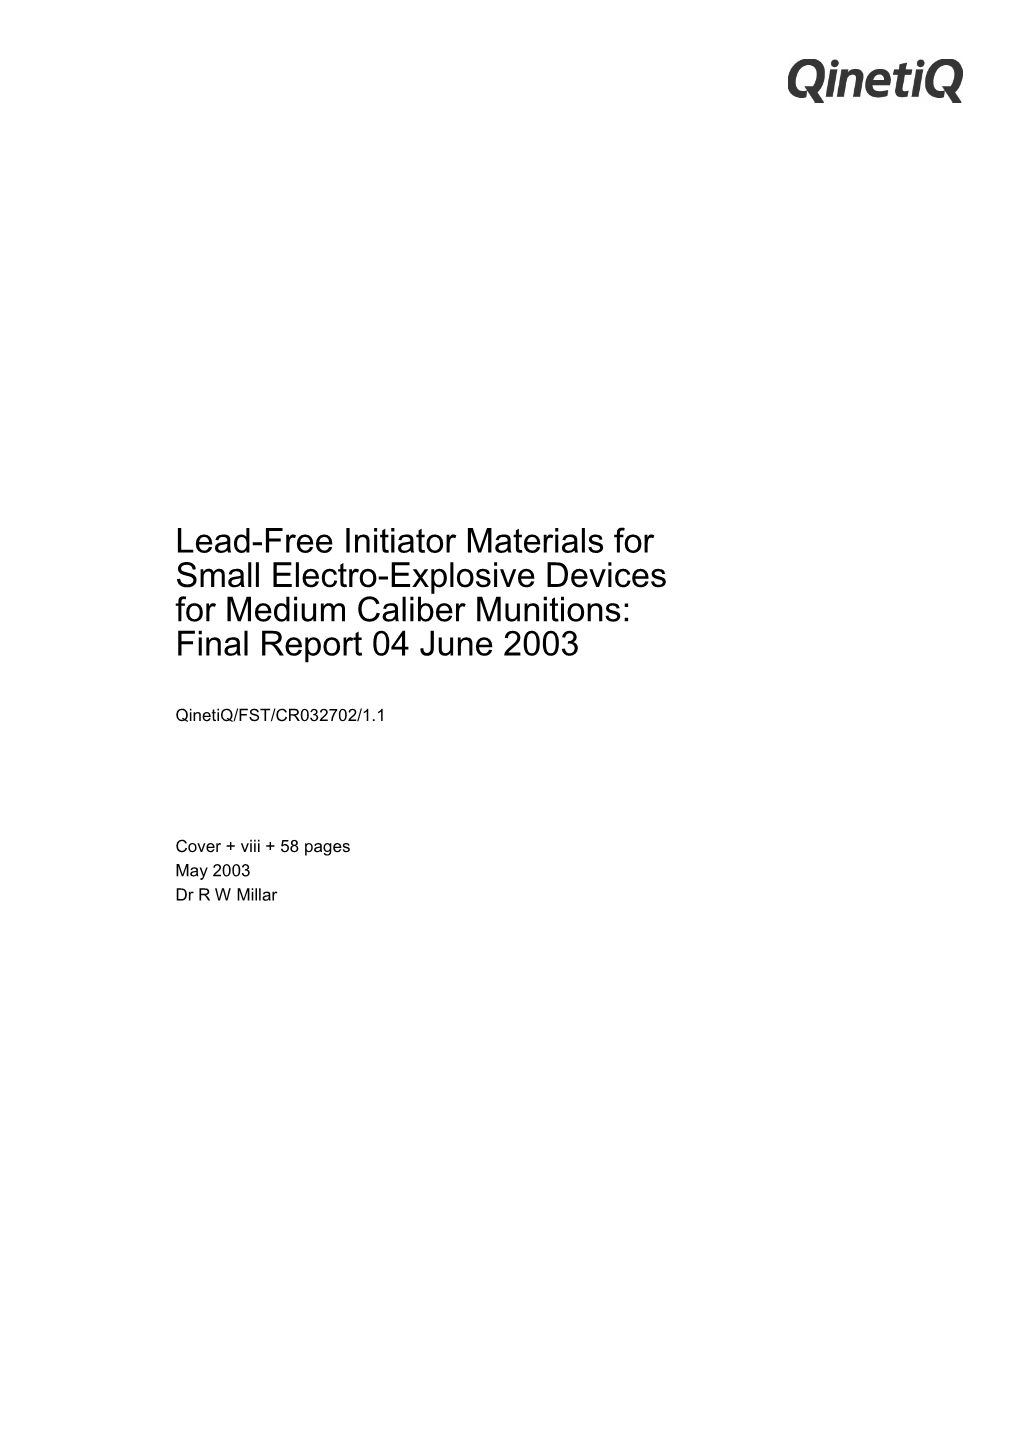 Lead-Free Initiator Materials for Small Electro-Explosive Devices for Medium Caliber Munitions: Final Report 04 June 2003